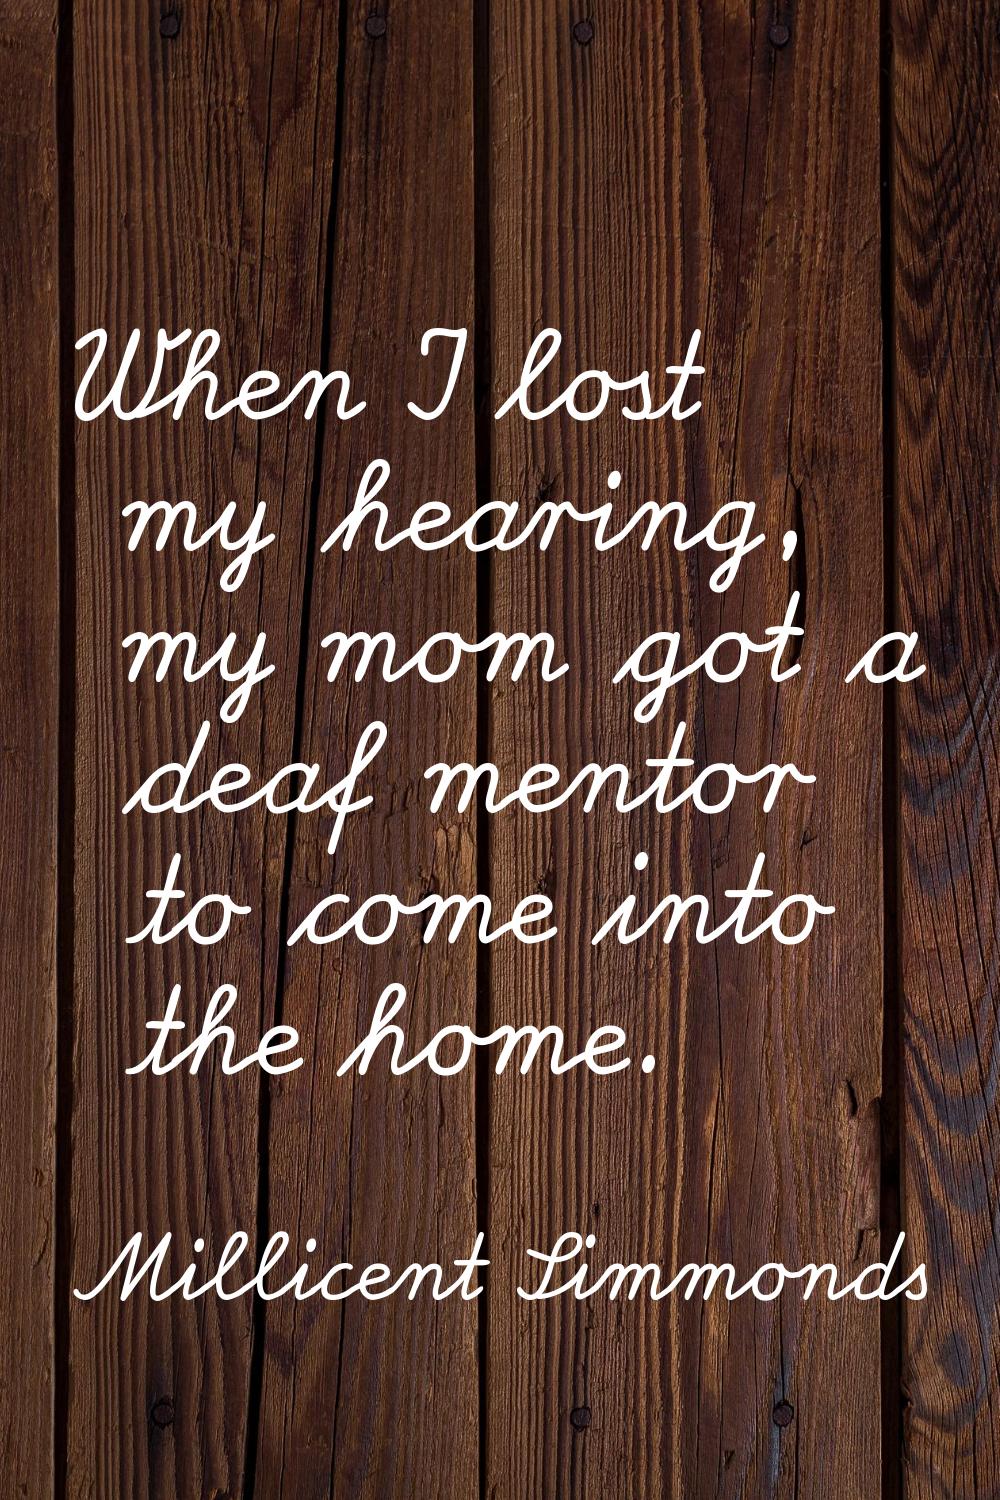 When I lost my hearing, my mom got a deaf mentor to come into the home.